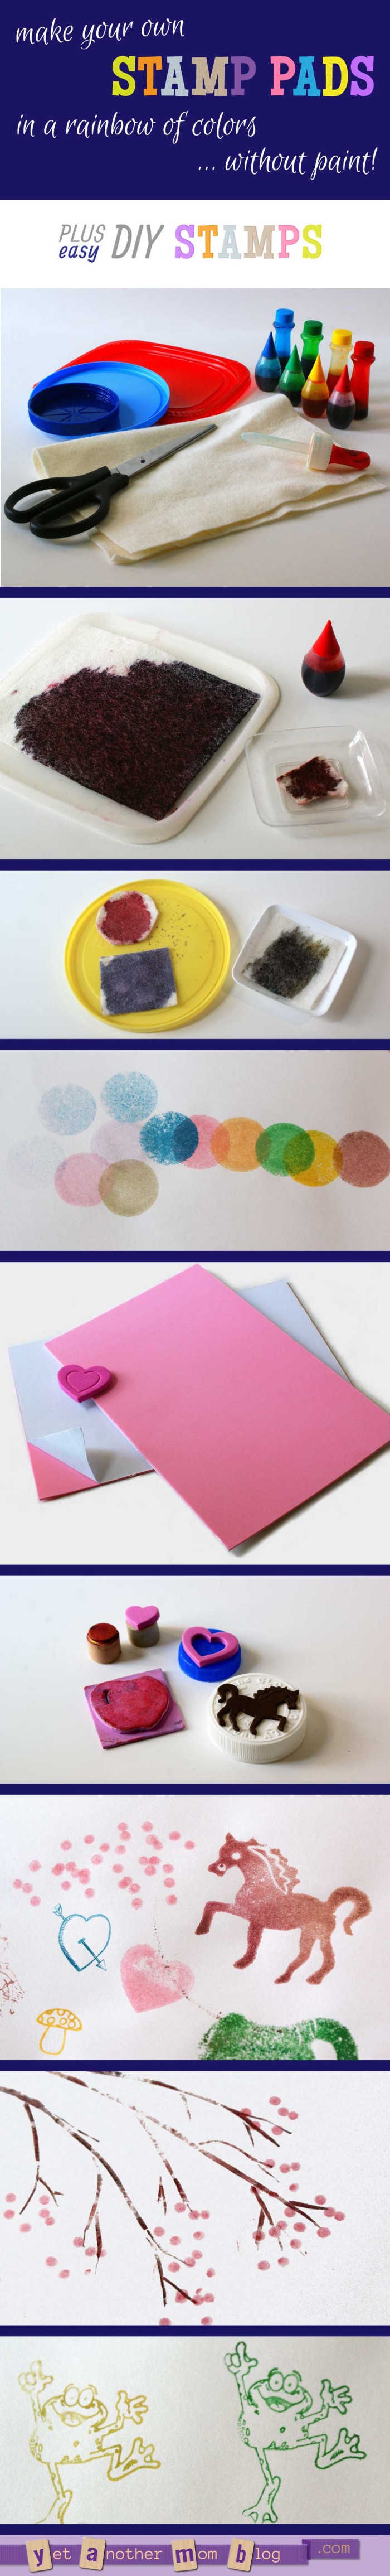 DIY Stamp Pads and Foam Stamps